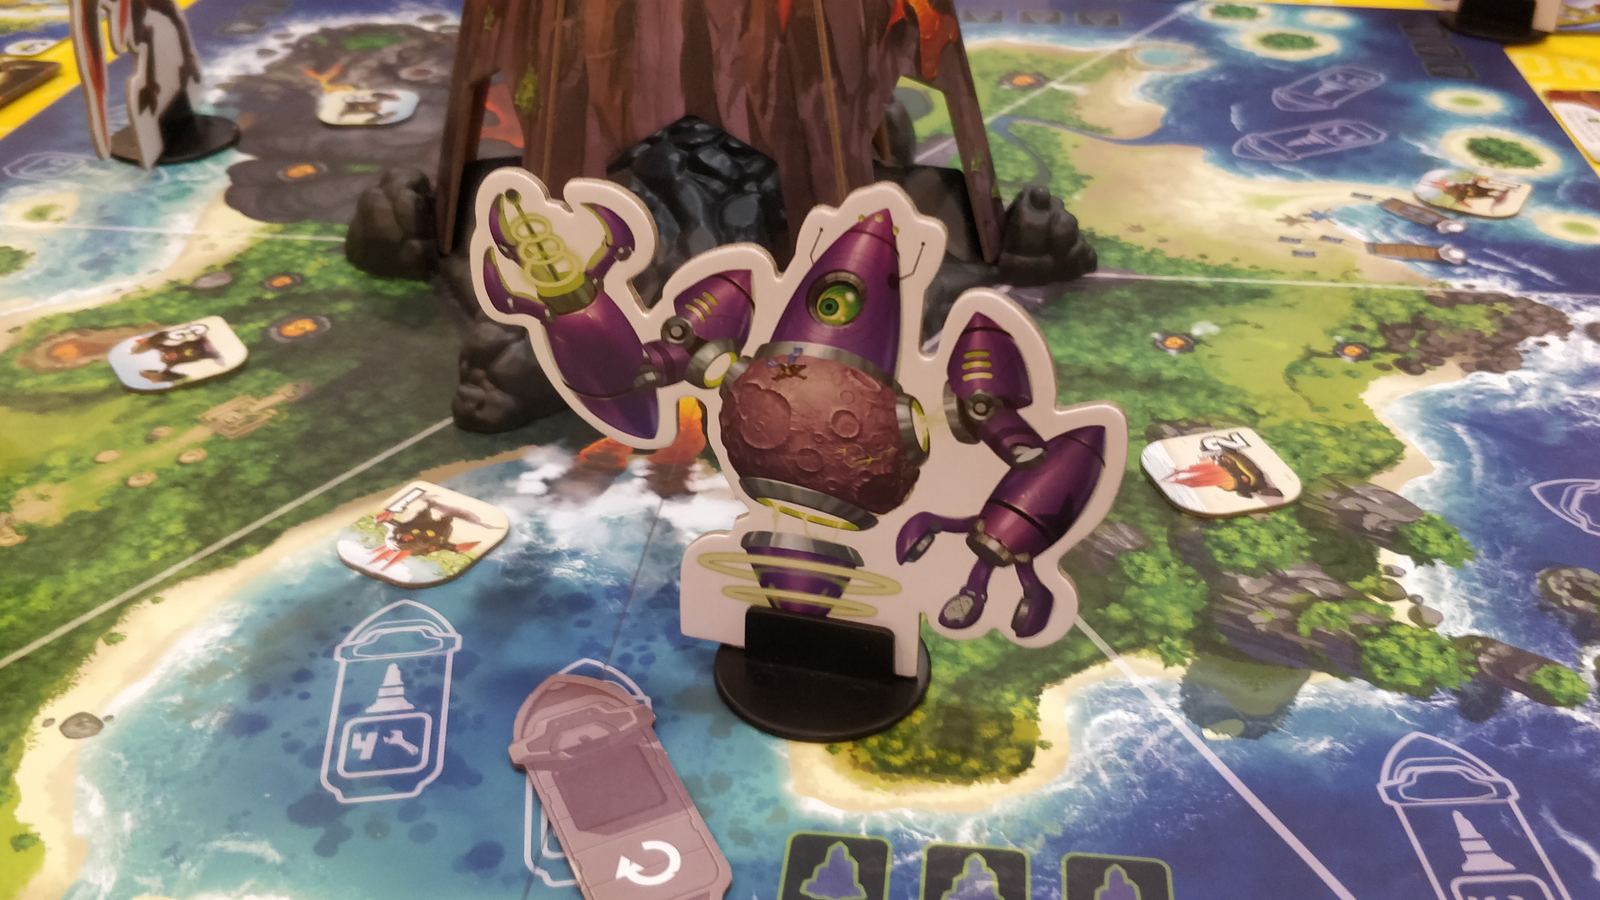  IELLO: King of Monster Island - Strategy Board Game, Sequel of  The King of Line, Family Game, Play Cooperatively, Ages 10+, 1-5 Players,  60 Minutes : Toys & Games